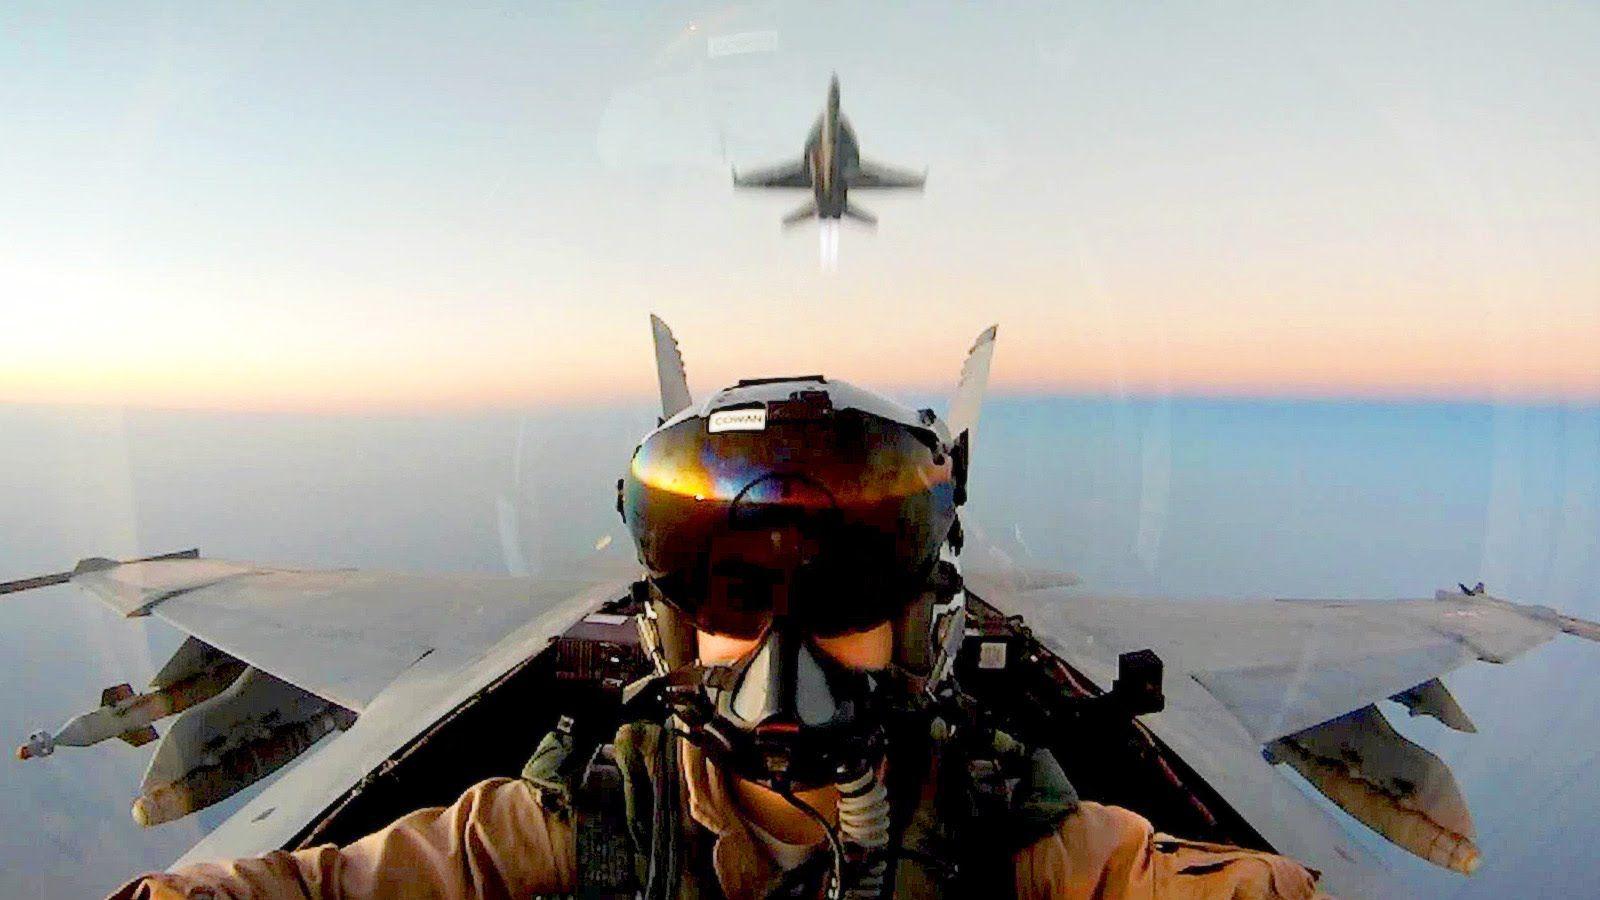 F 18 Super Hornets In Action The Awesomeness Of This